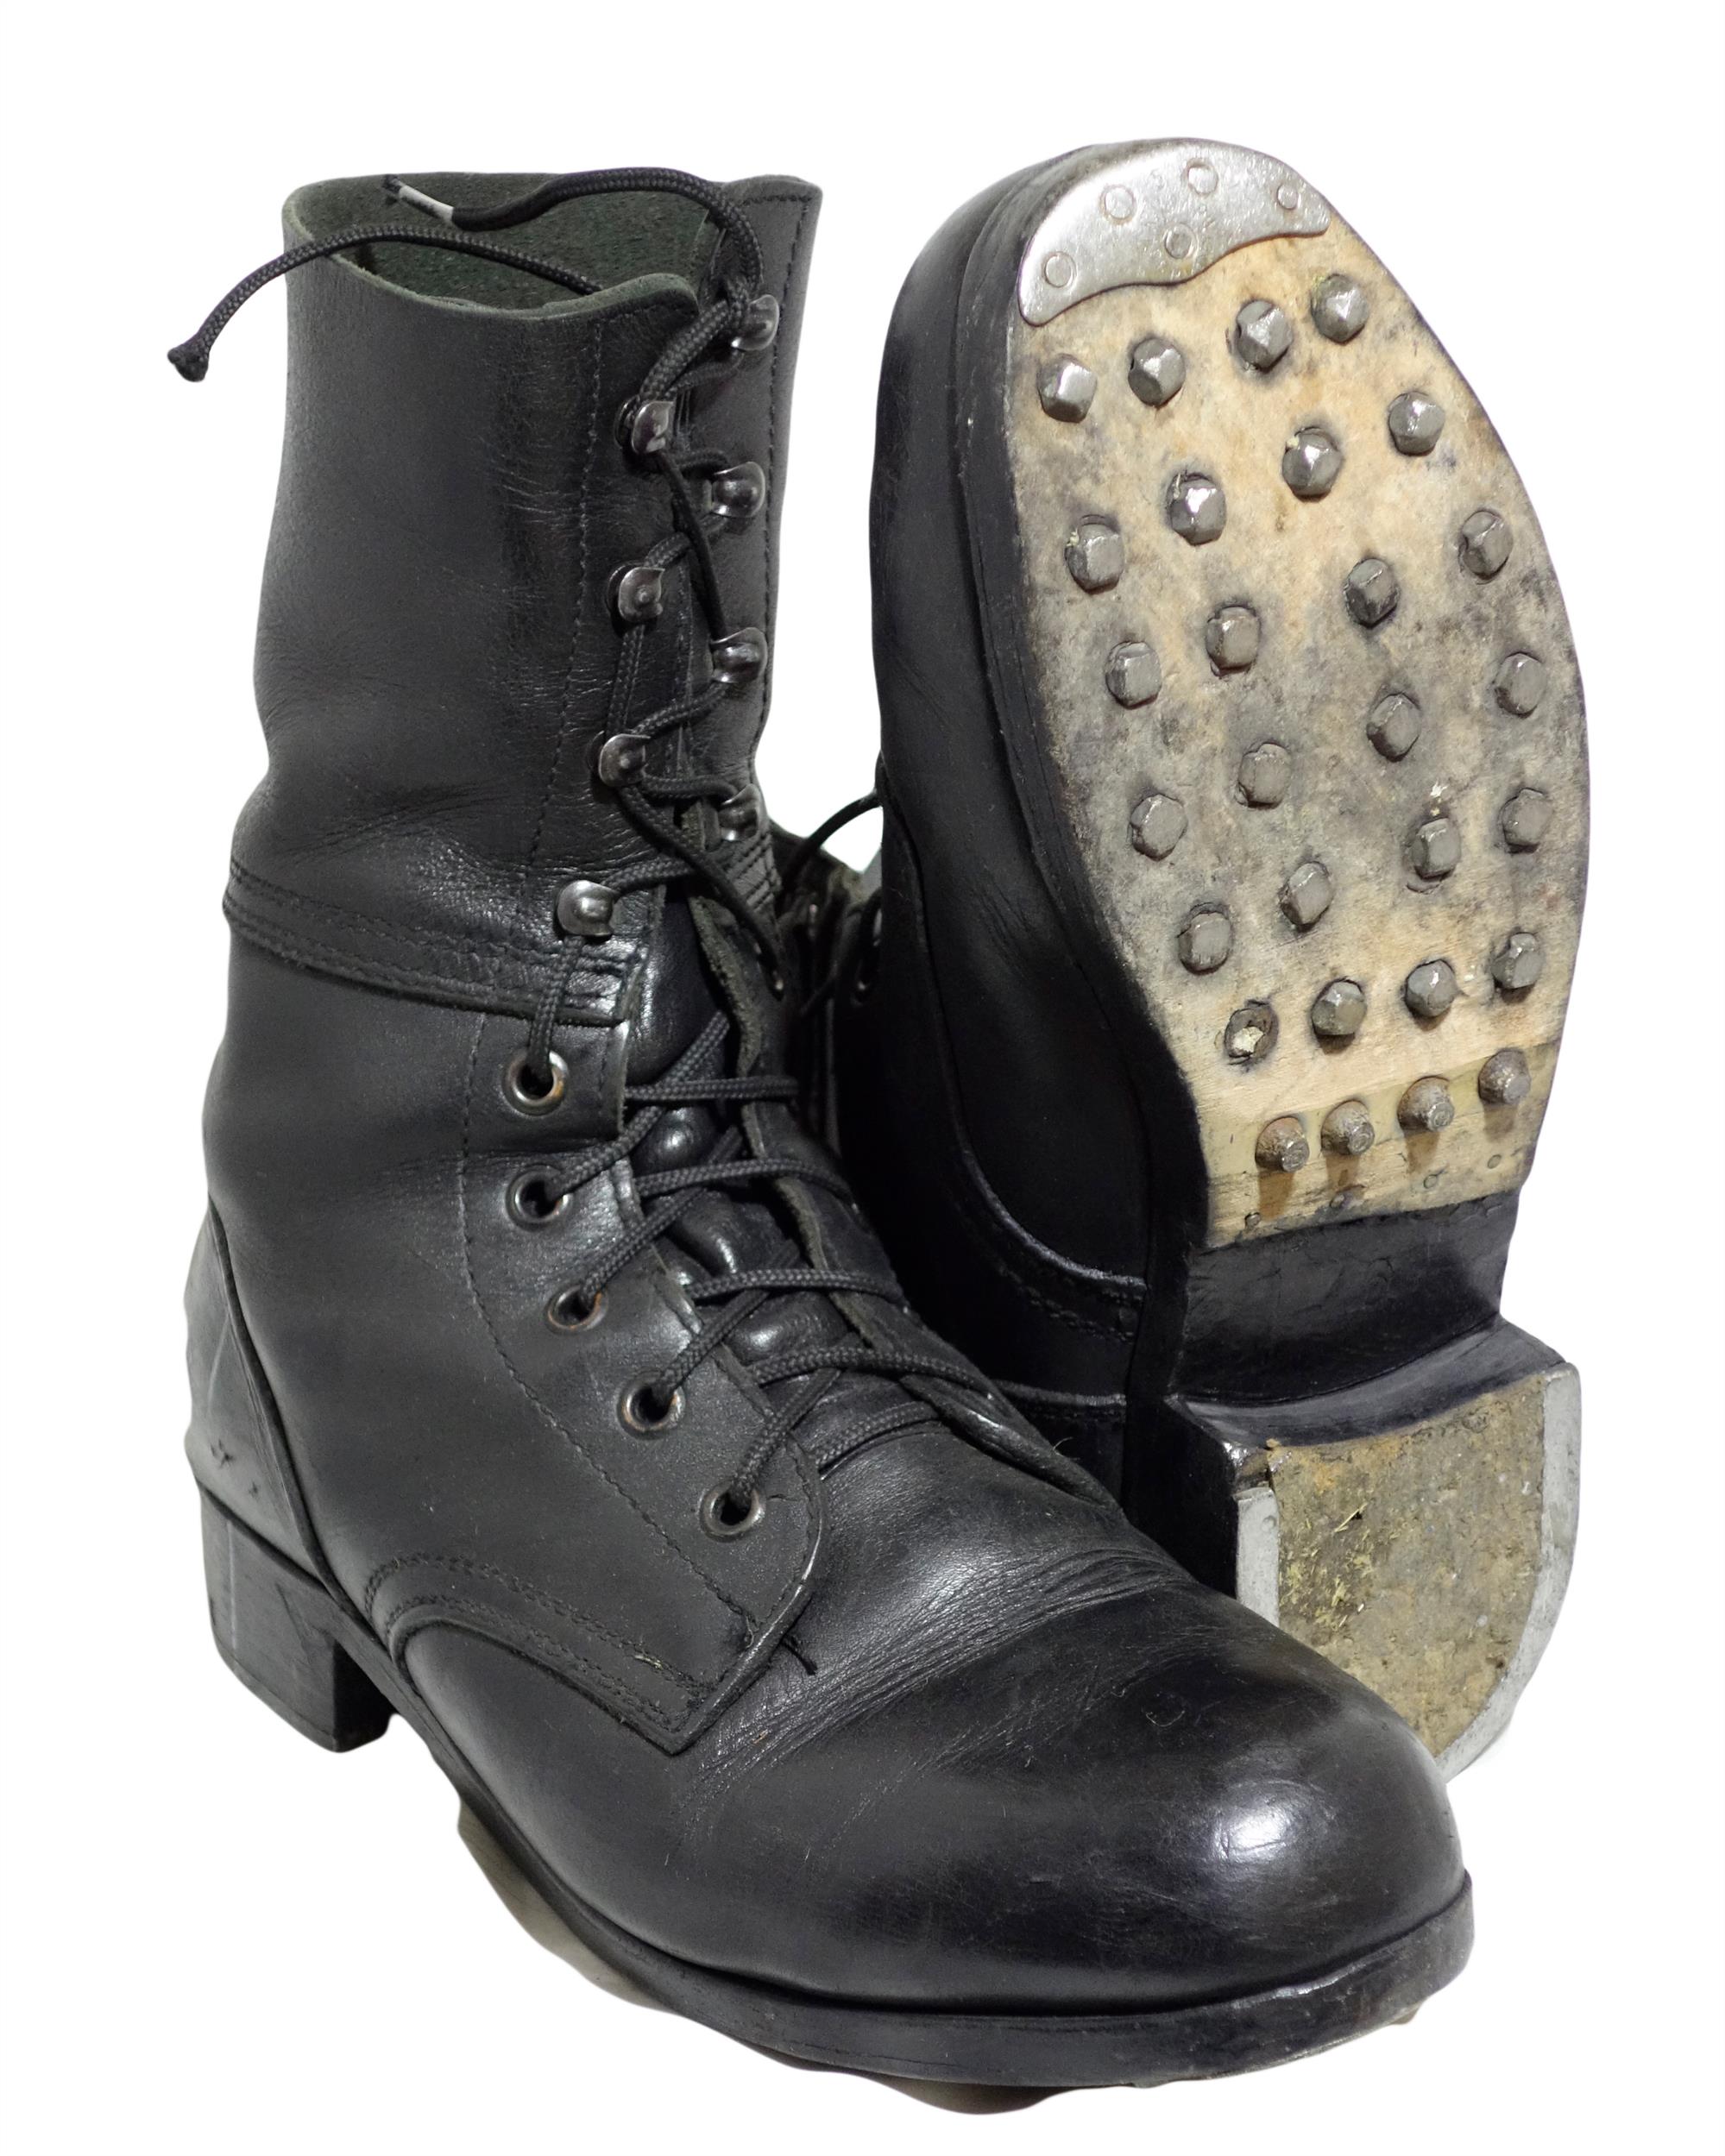 Austrian Army Surplus Rangers Boots with Studded sole - Surplus & Lost